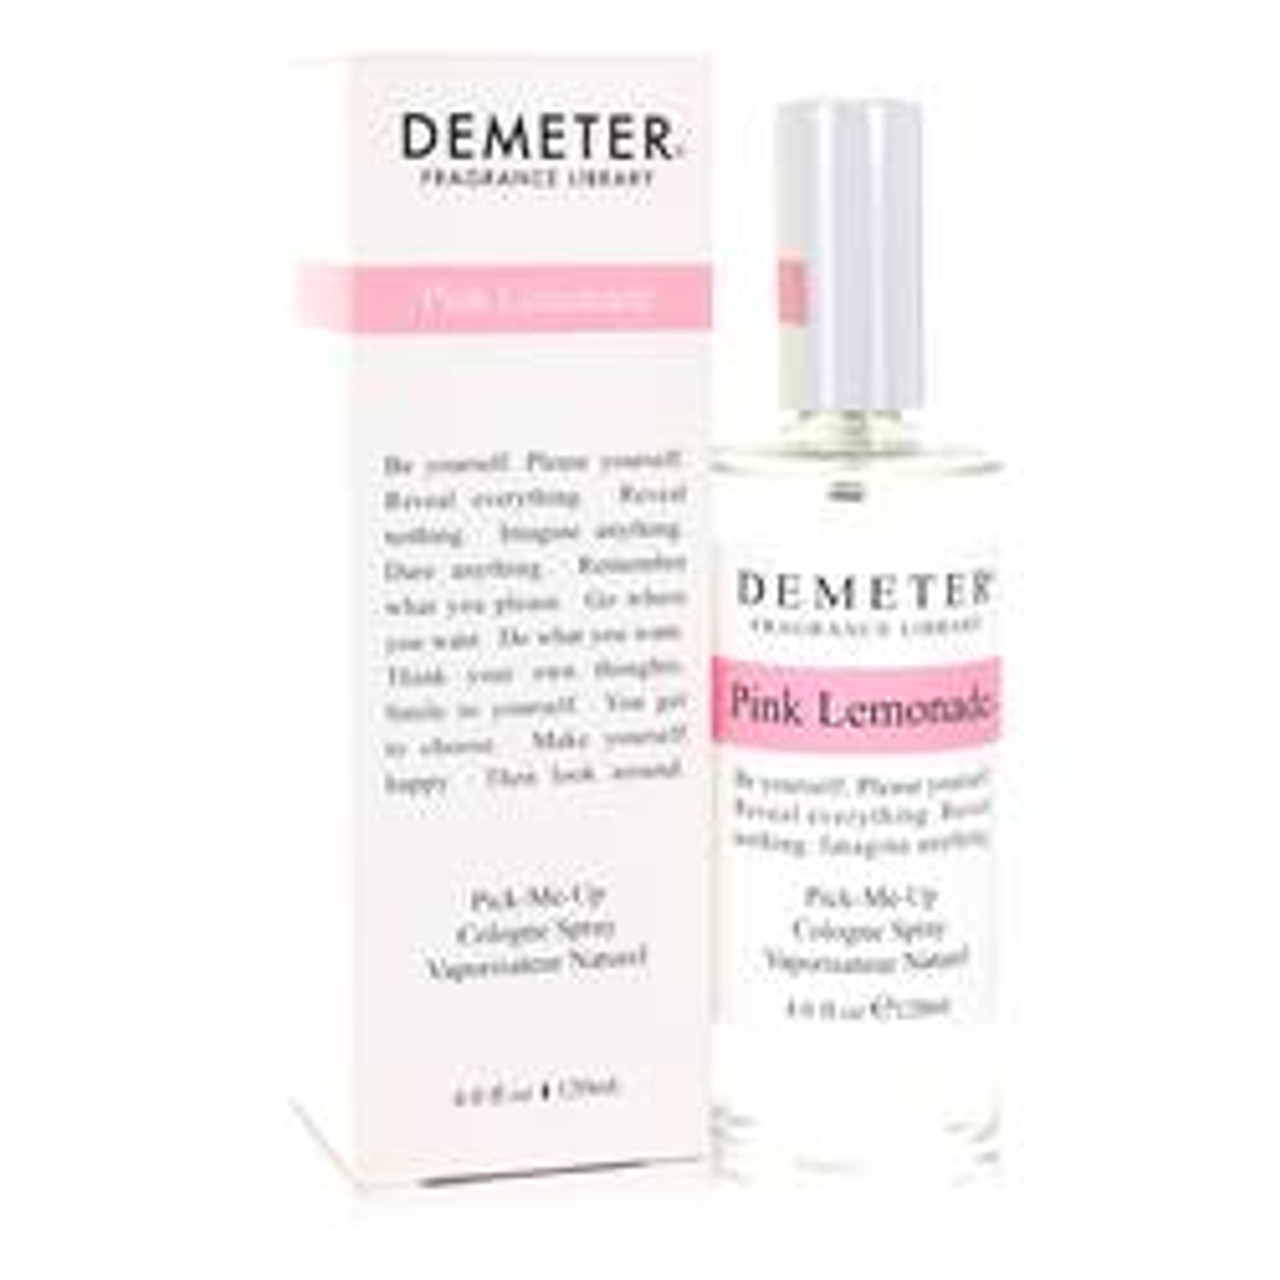 Demeter Pink Lemonade Perfume By Demeter Cologne Spray 4 oz for Women - [From 47.00 - Choose pk Qty ] - *Ships from Miami